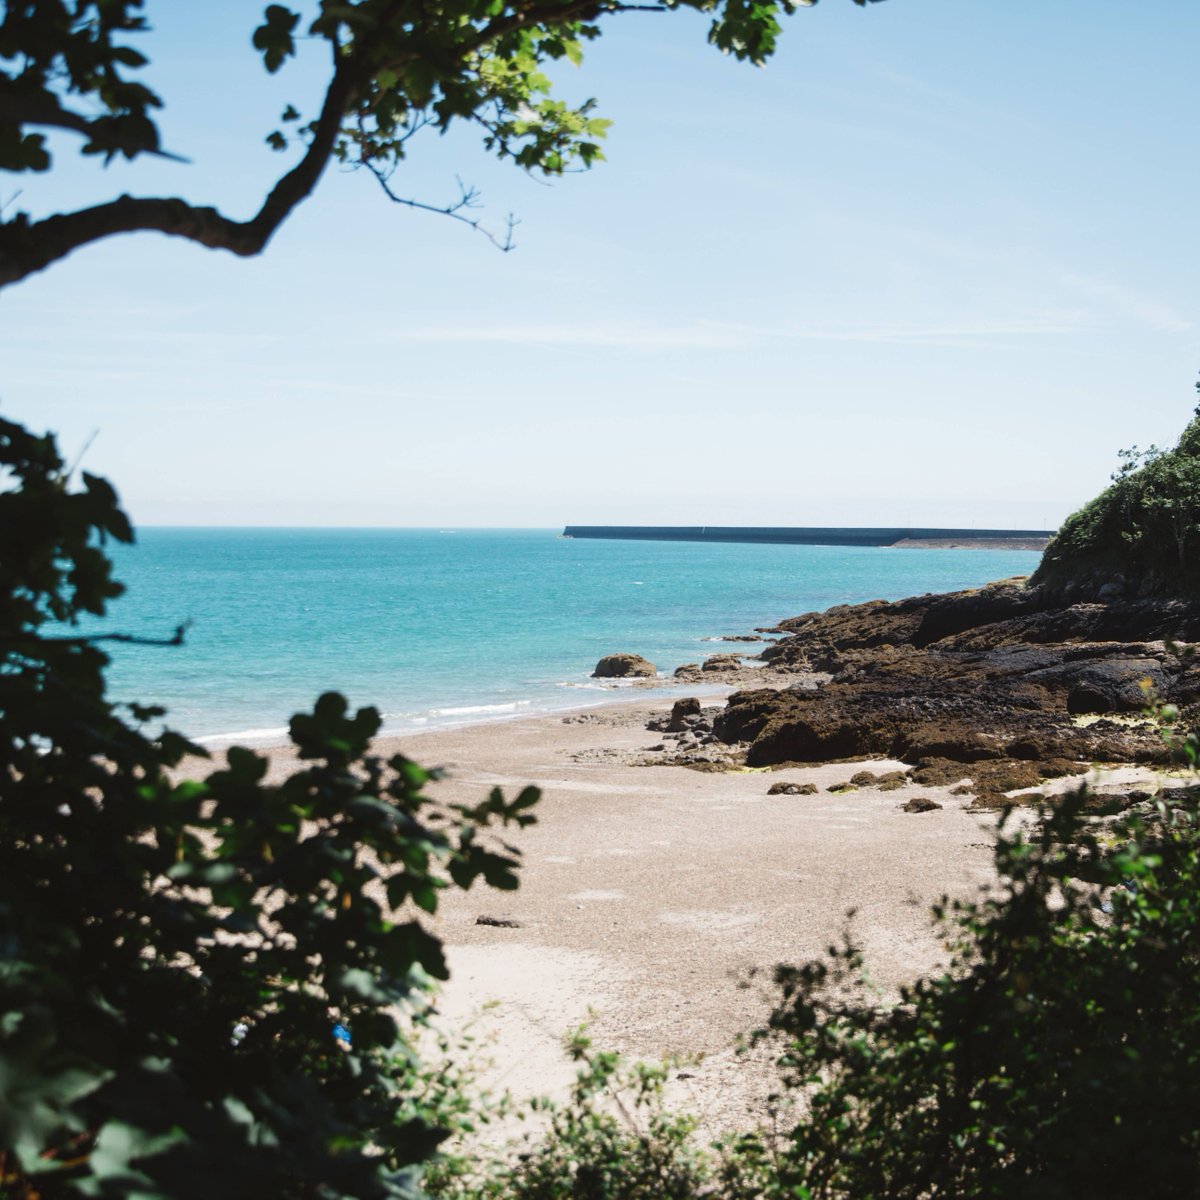 Not only does Jersey have gorgeous seas but the seaweed is also used as a natural fertiliser for #JerseyRoyals. Many of the farmers are fourth or fifth generation and still employ some of the most traditional methods of farming like using beach-gathered seaweed, known as Vraic.